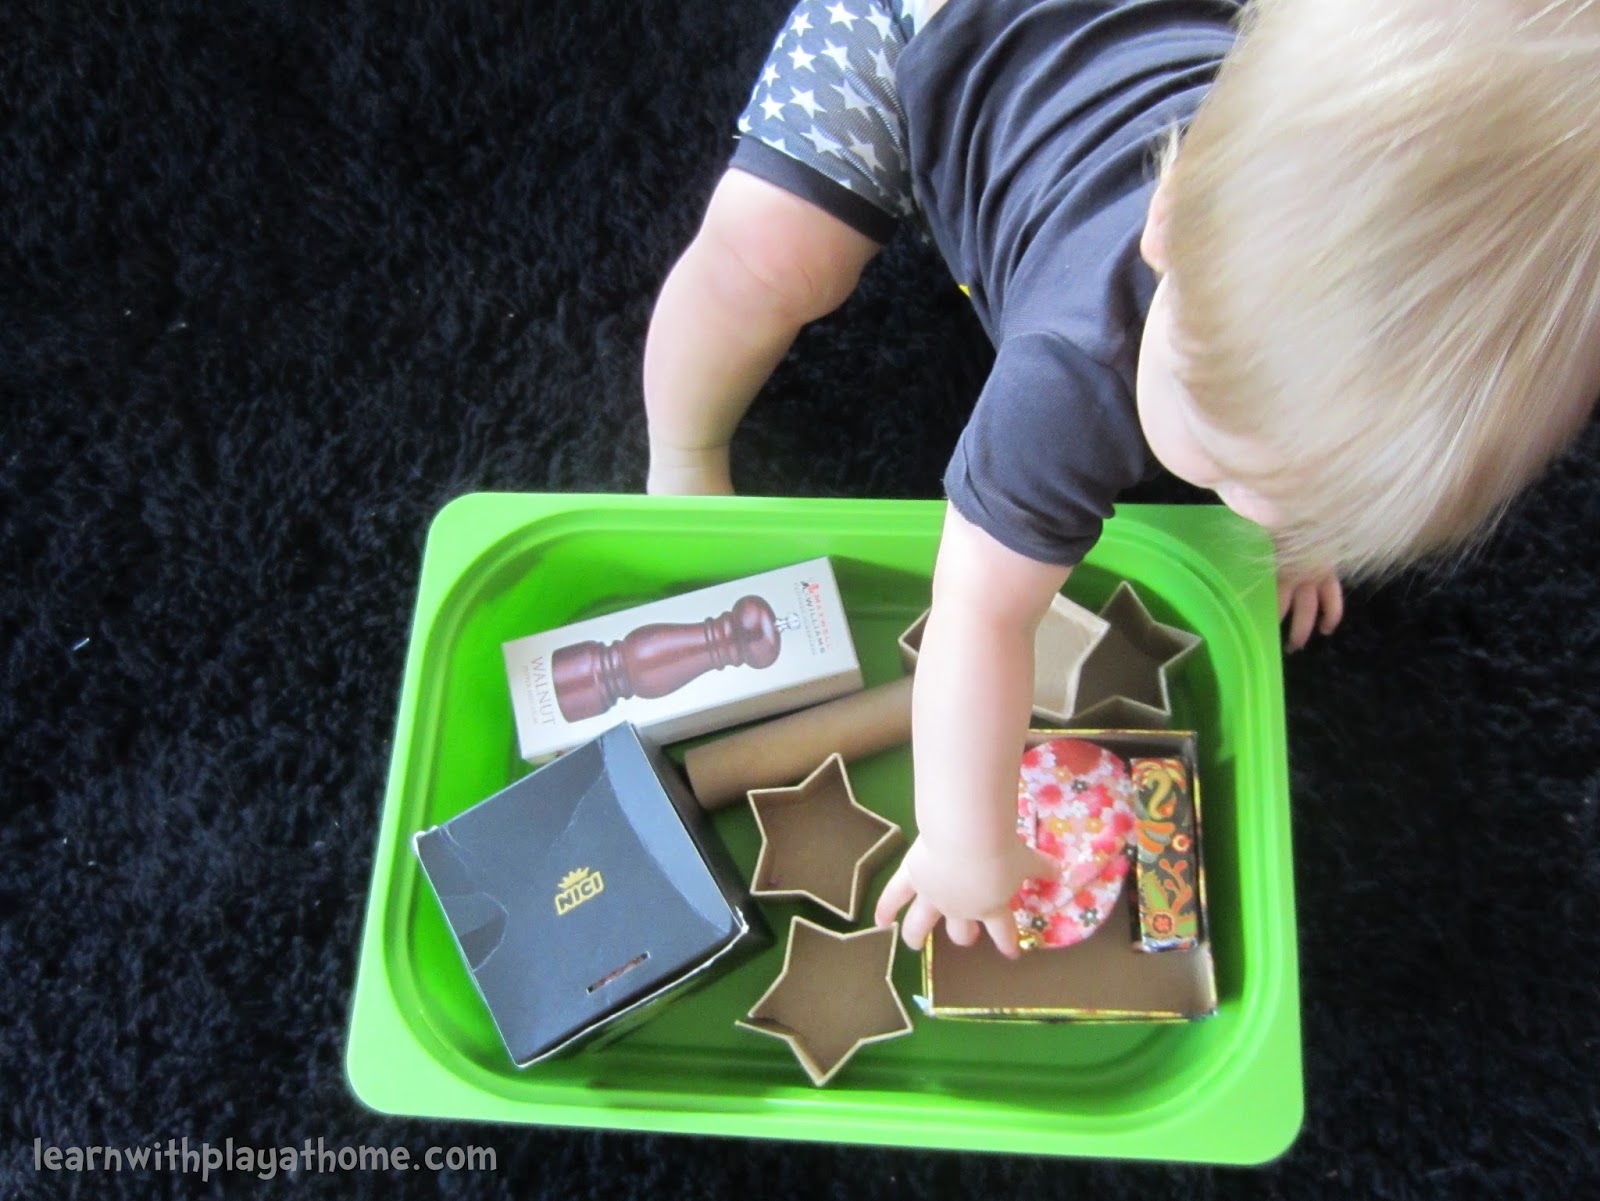 The Ultimate List of Baby Play Ideas from Fun at Home with Kids